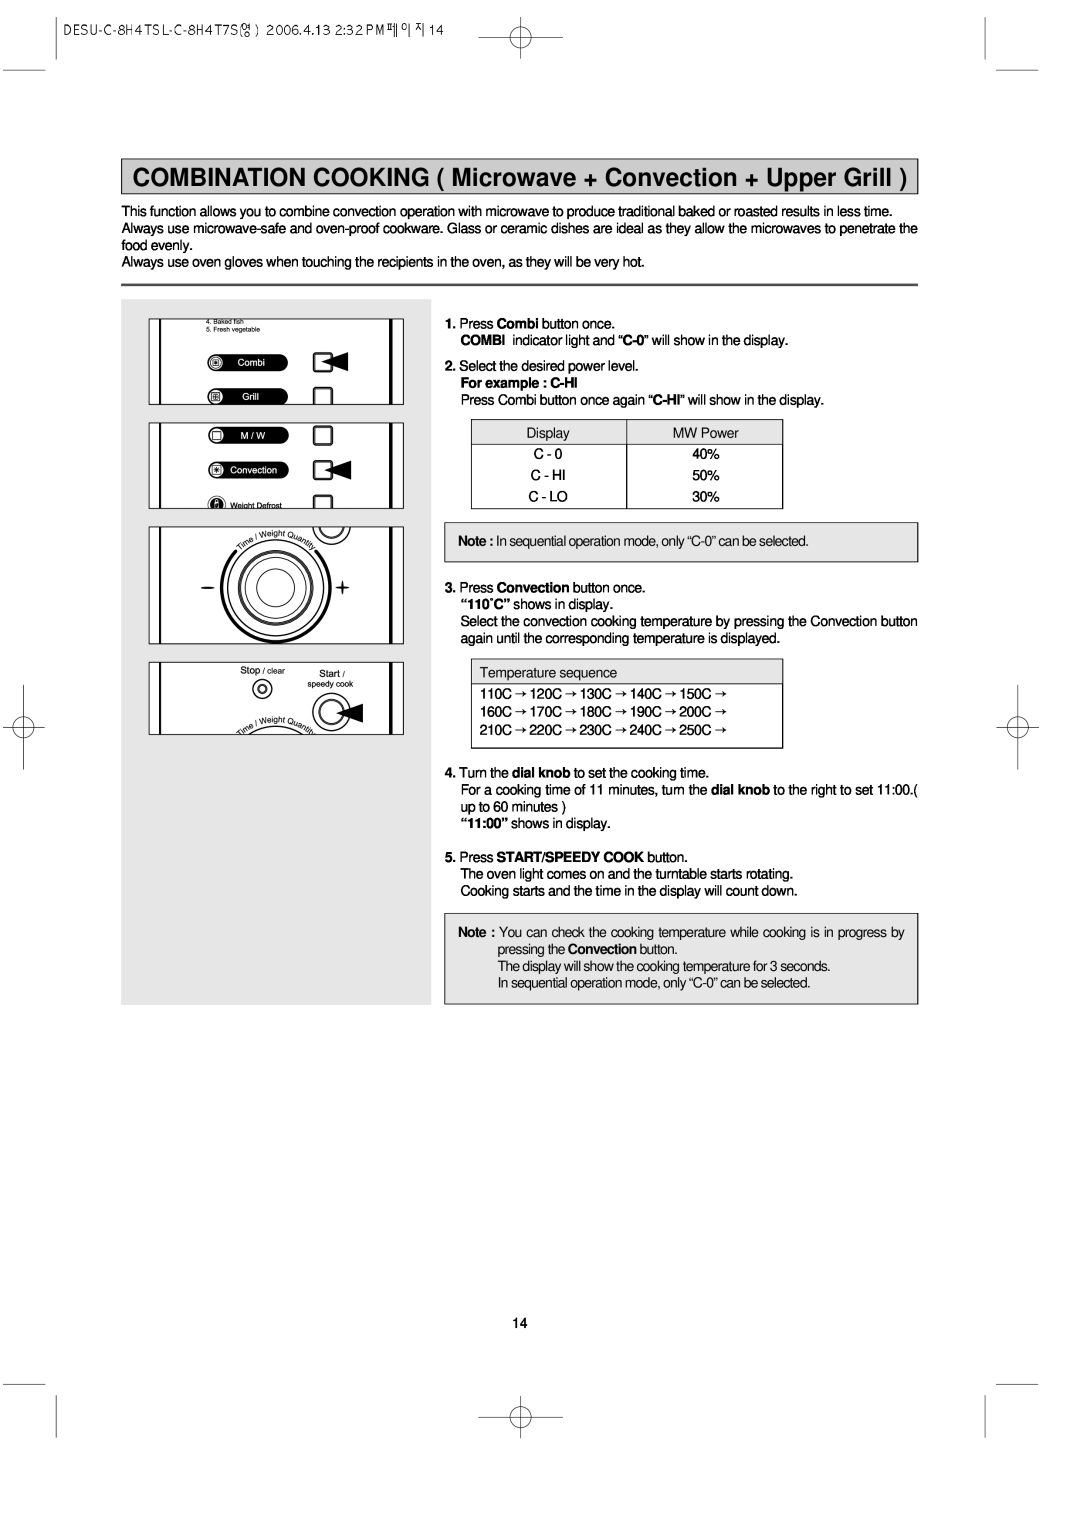 Daewoo KOC-8H4TSL owner manual COMBINATION COOKING Microwave + Convection + Upper Grill, For example C-HI, C - Hi 